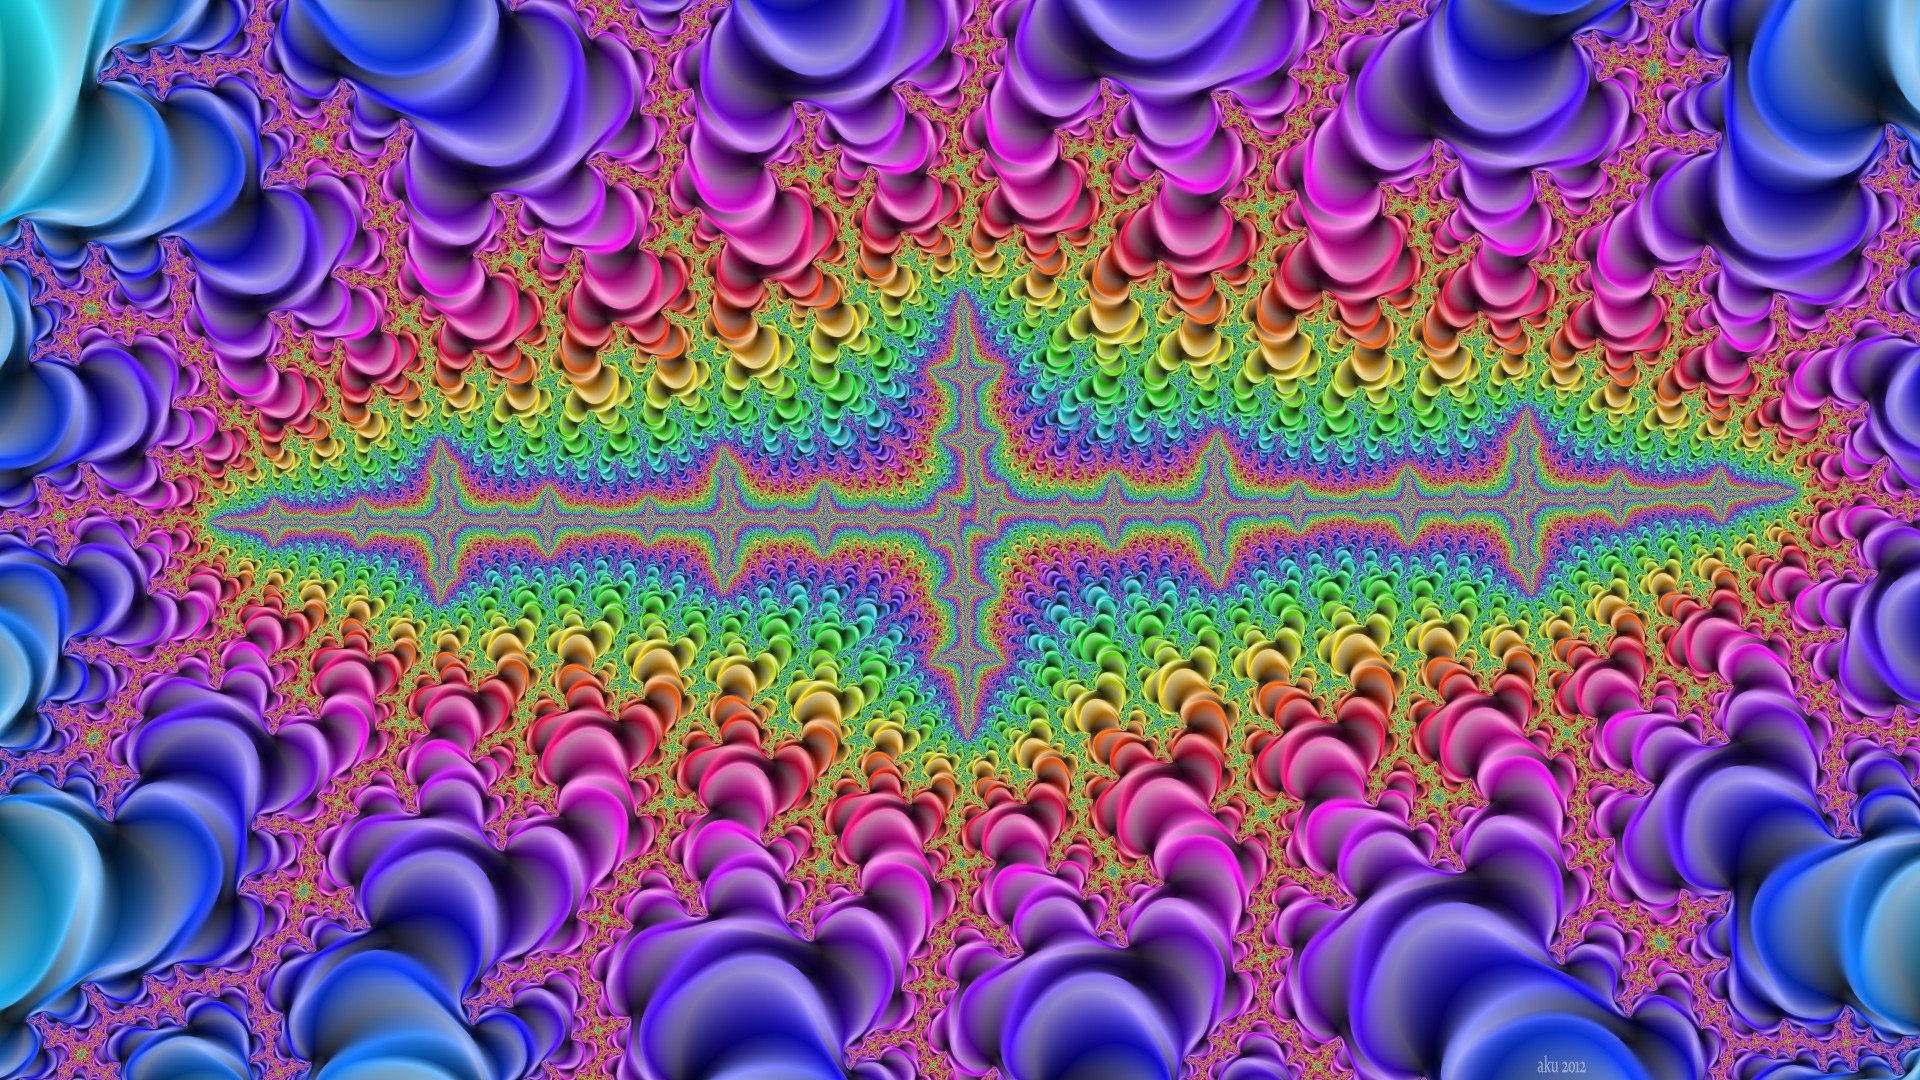 Psychedelic Infinity | Top reddit wallpapers | Pinterest |  Psychedelic and Infinity